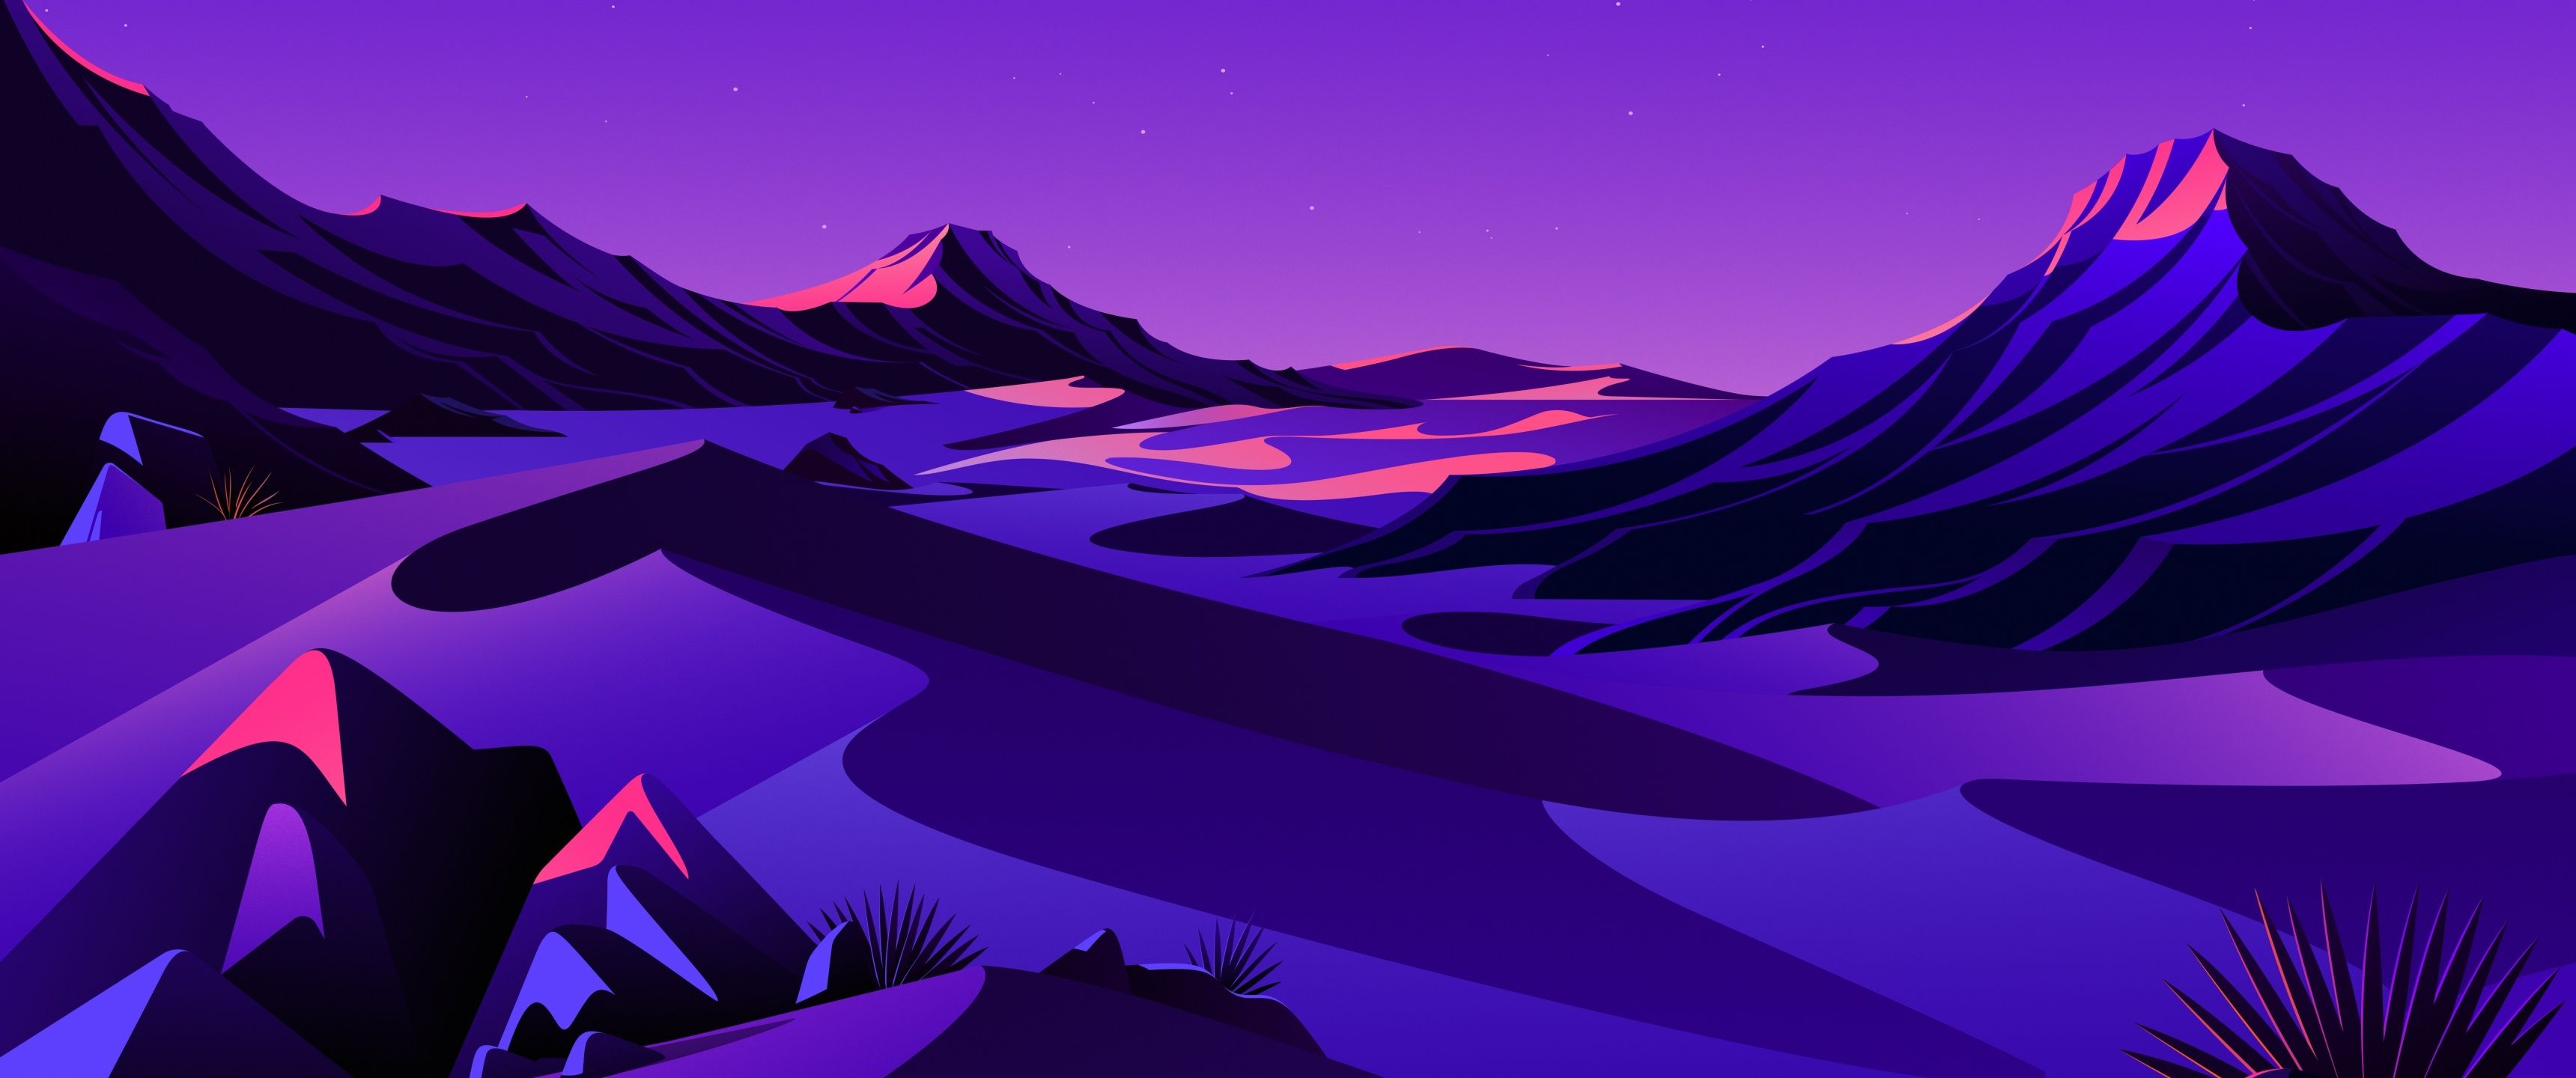 A purple desert at night with pink mountains - 3440x1440